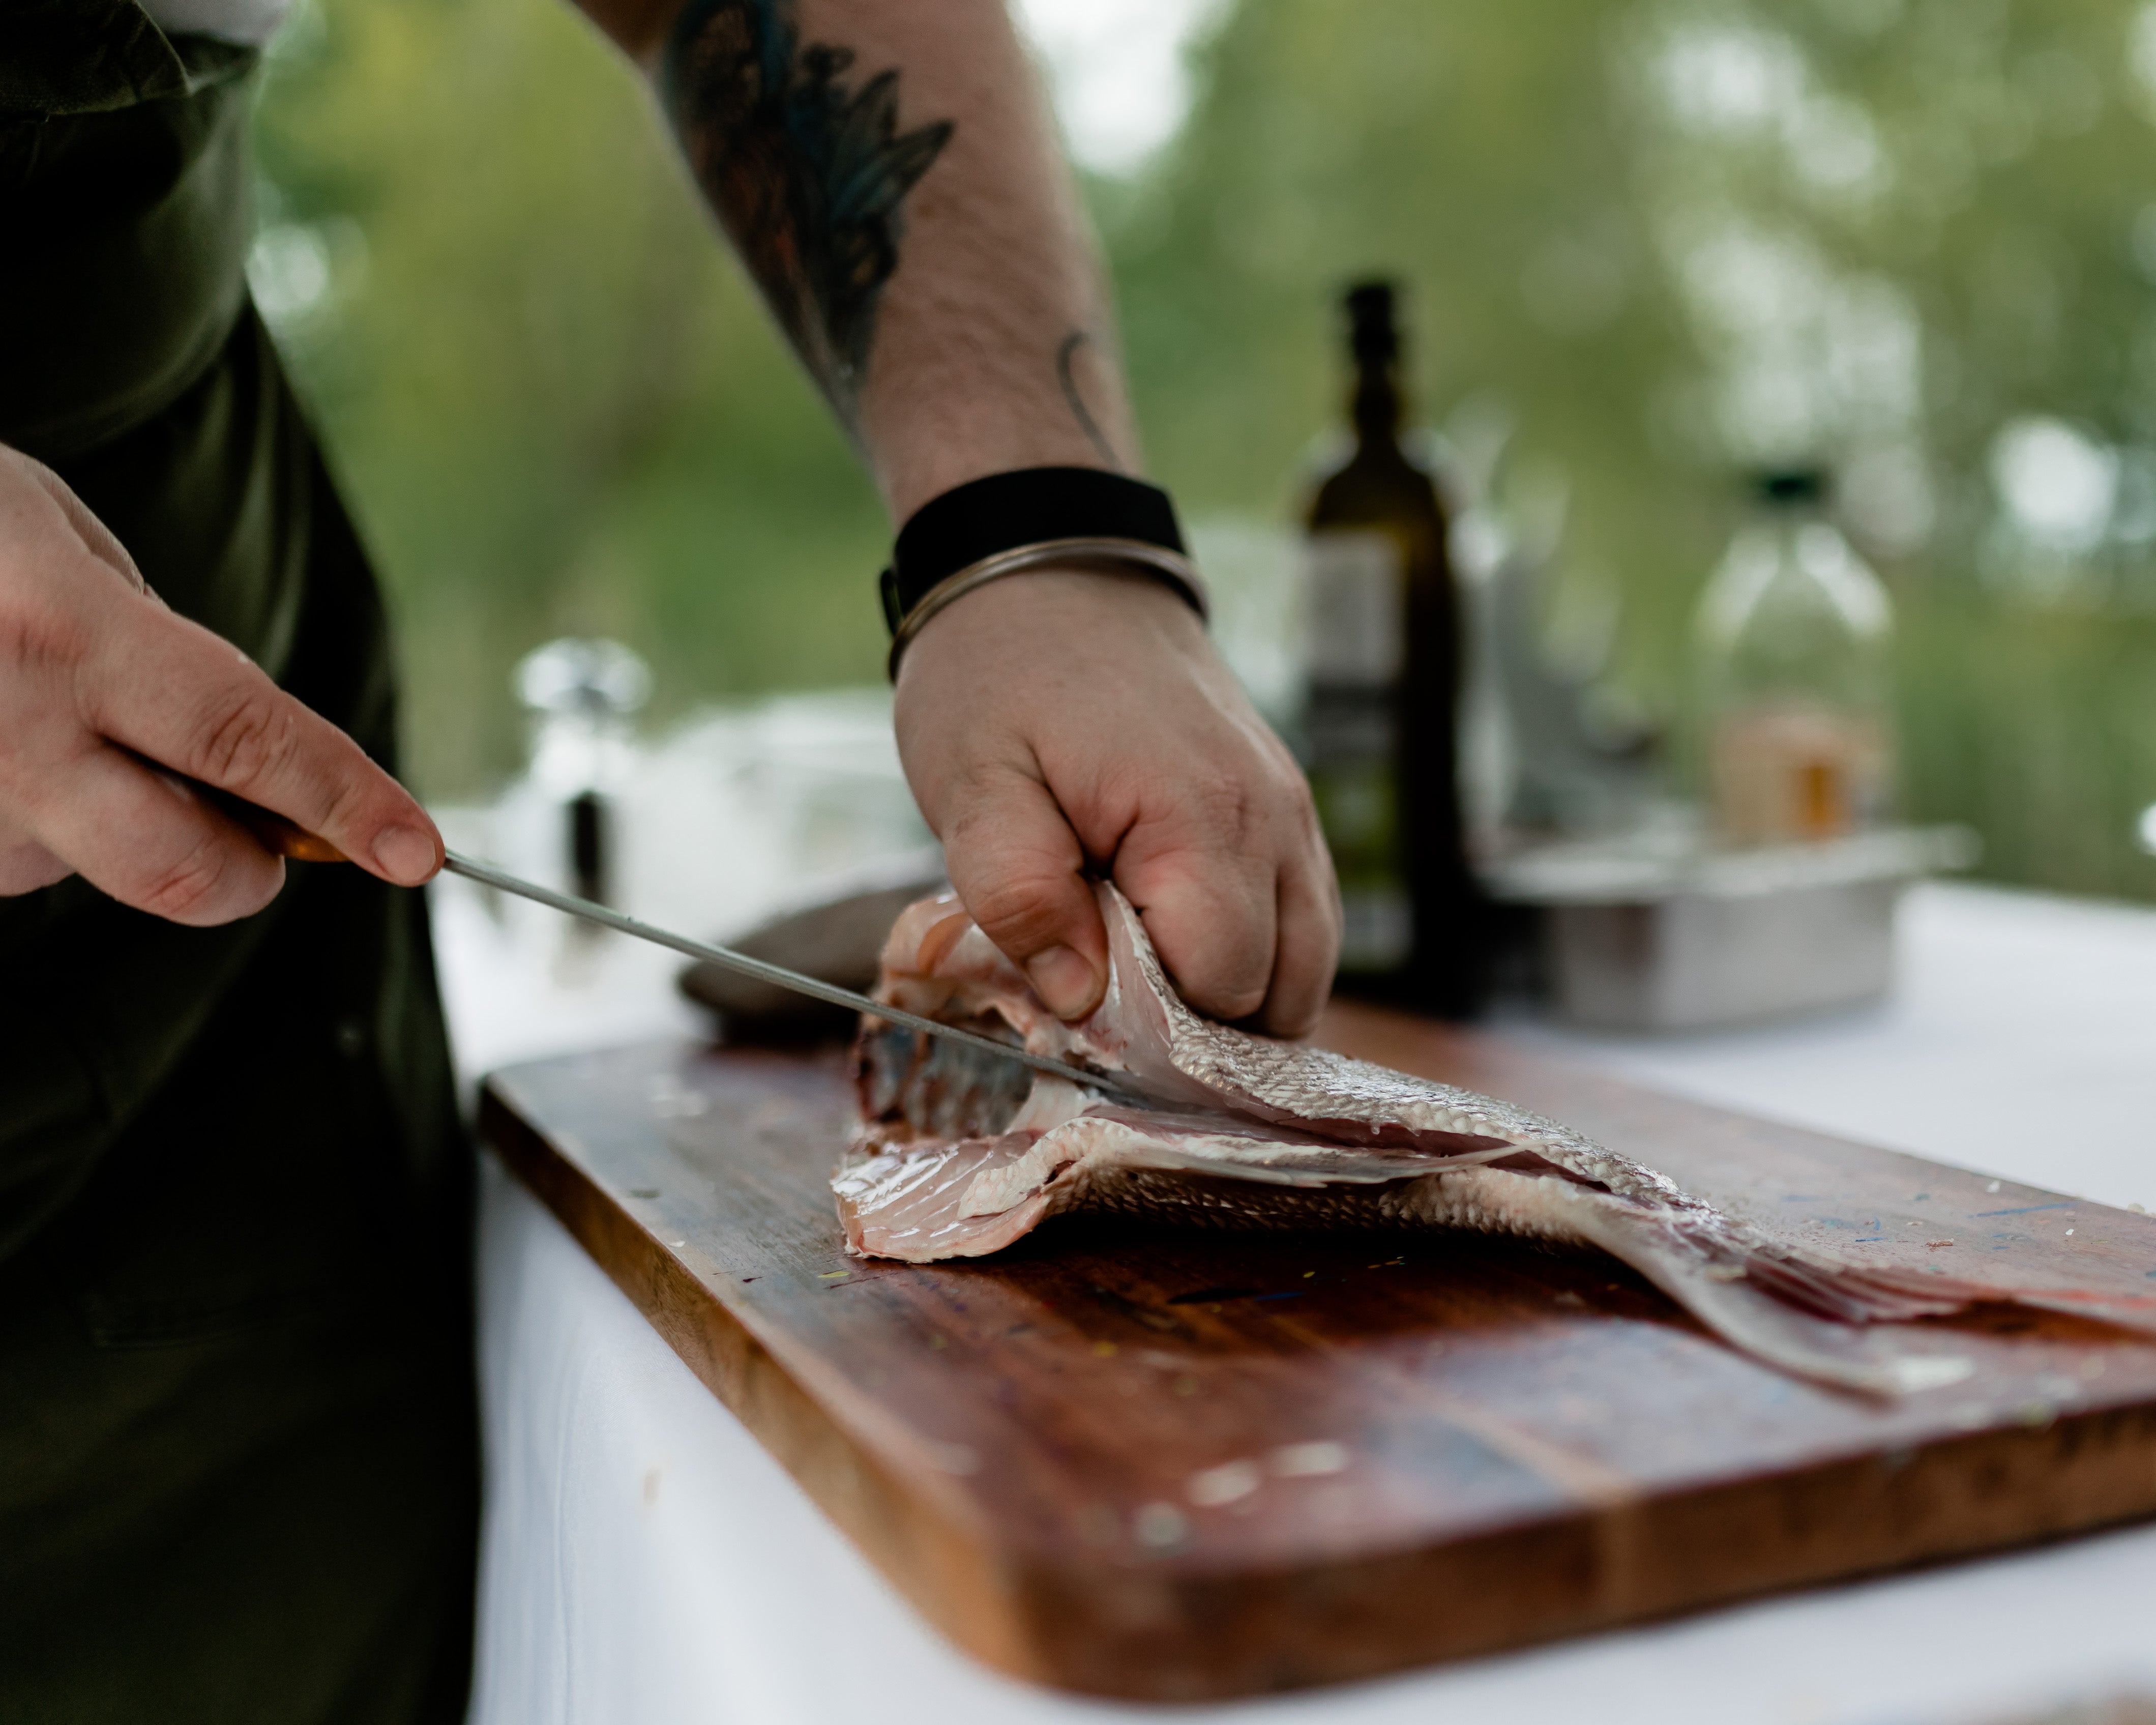 The Art of Filleting Fish: Using the Best Knife